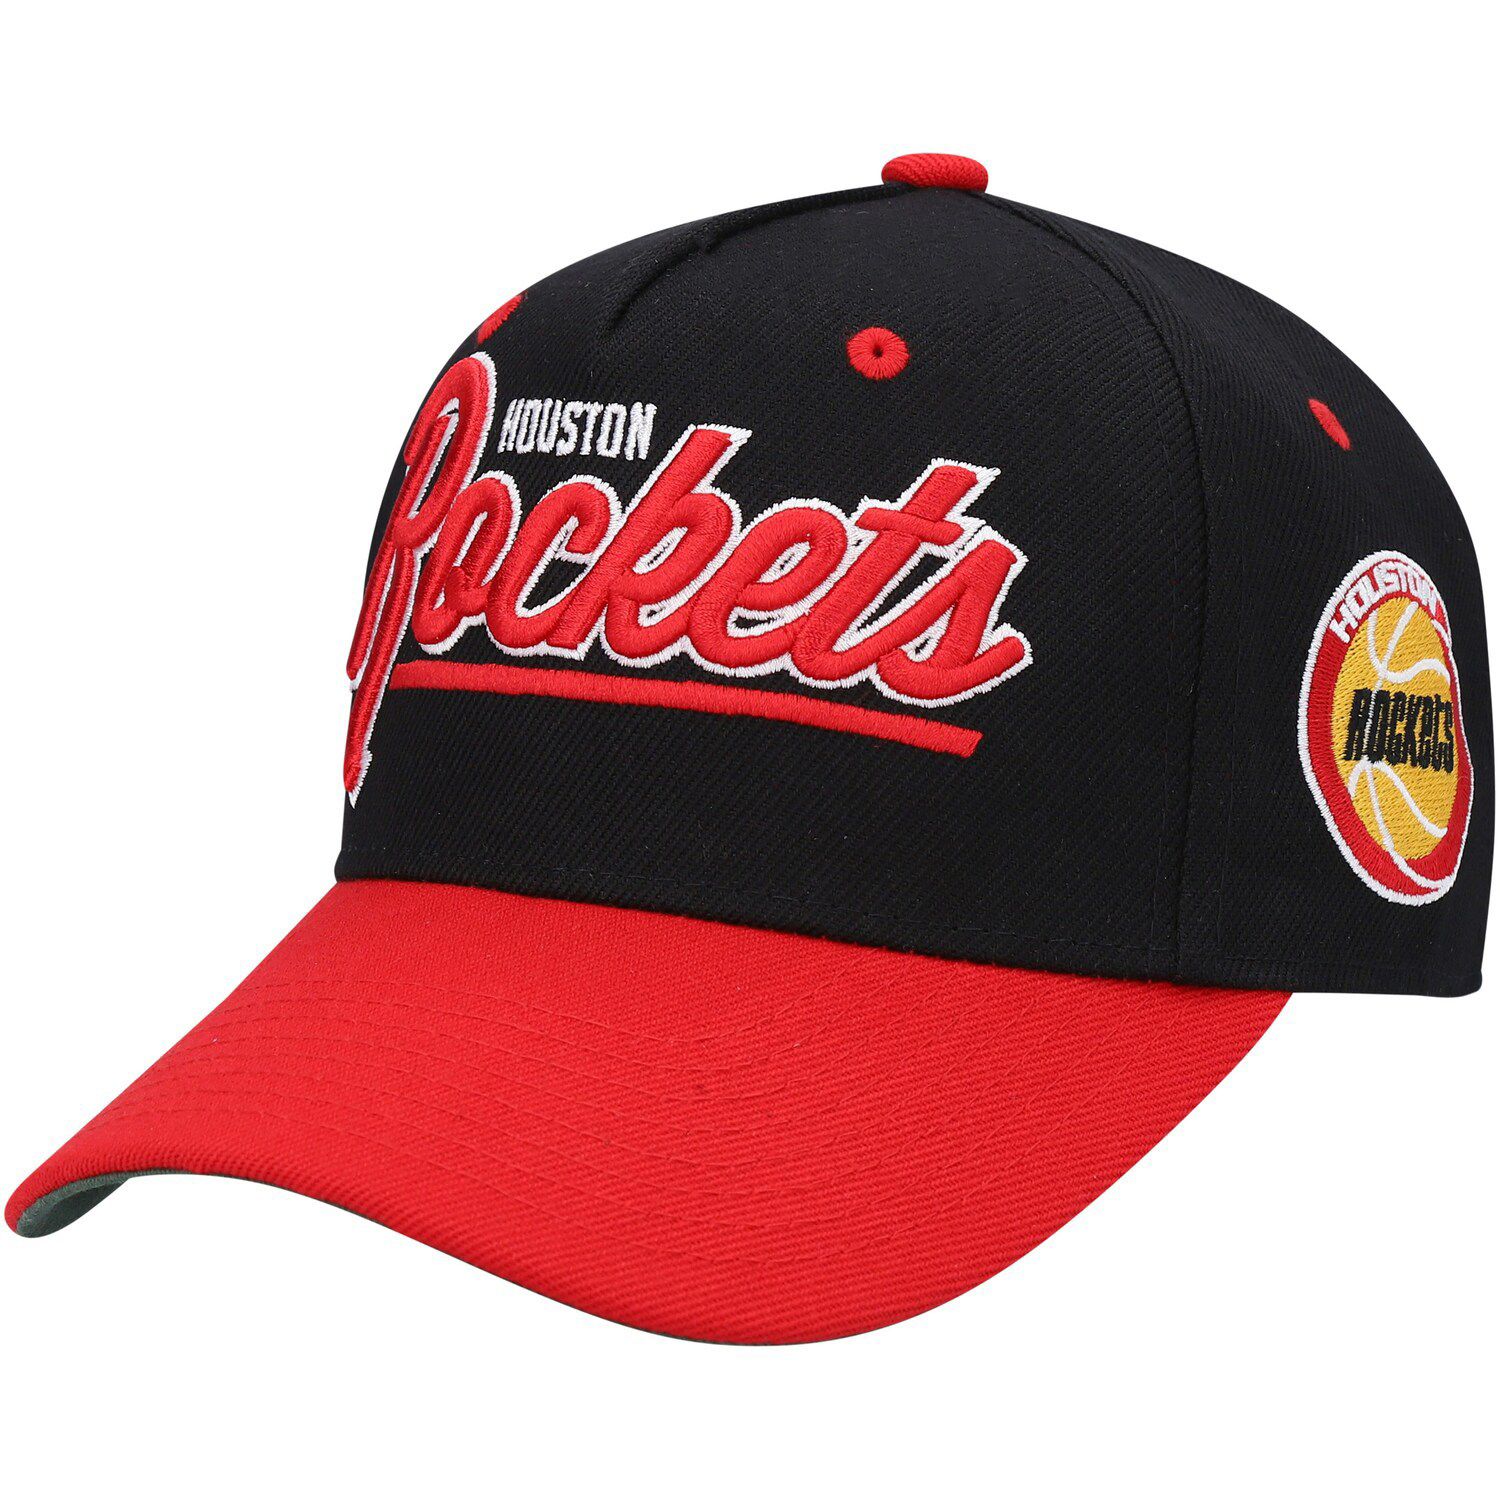 Image for Unbranded Youth Mitchell & Ness Black Houston Rockets Retro Script Precurved Snapback Hat at Kohl's.